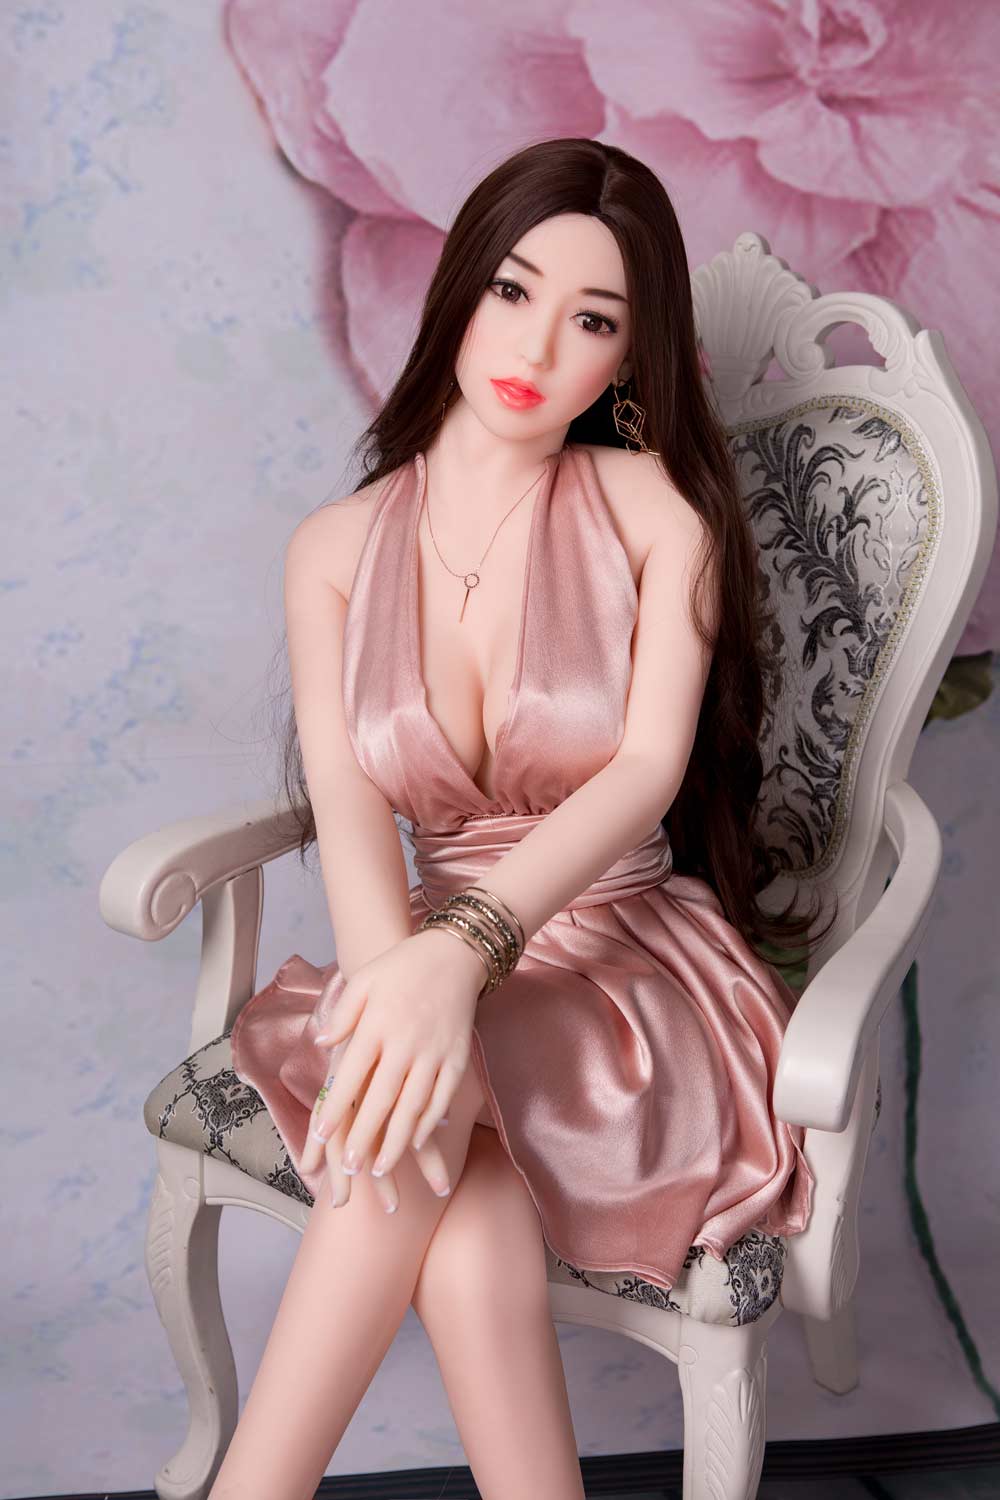 New Hot Chinese Beautiful Young Women Sex Doll pic picture